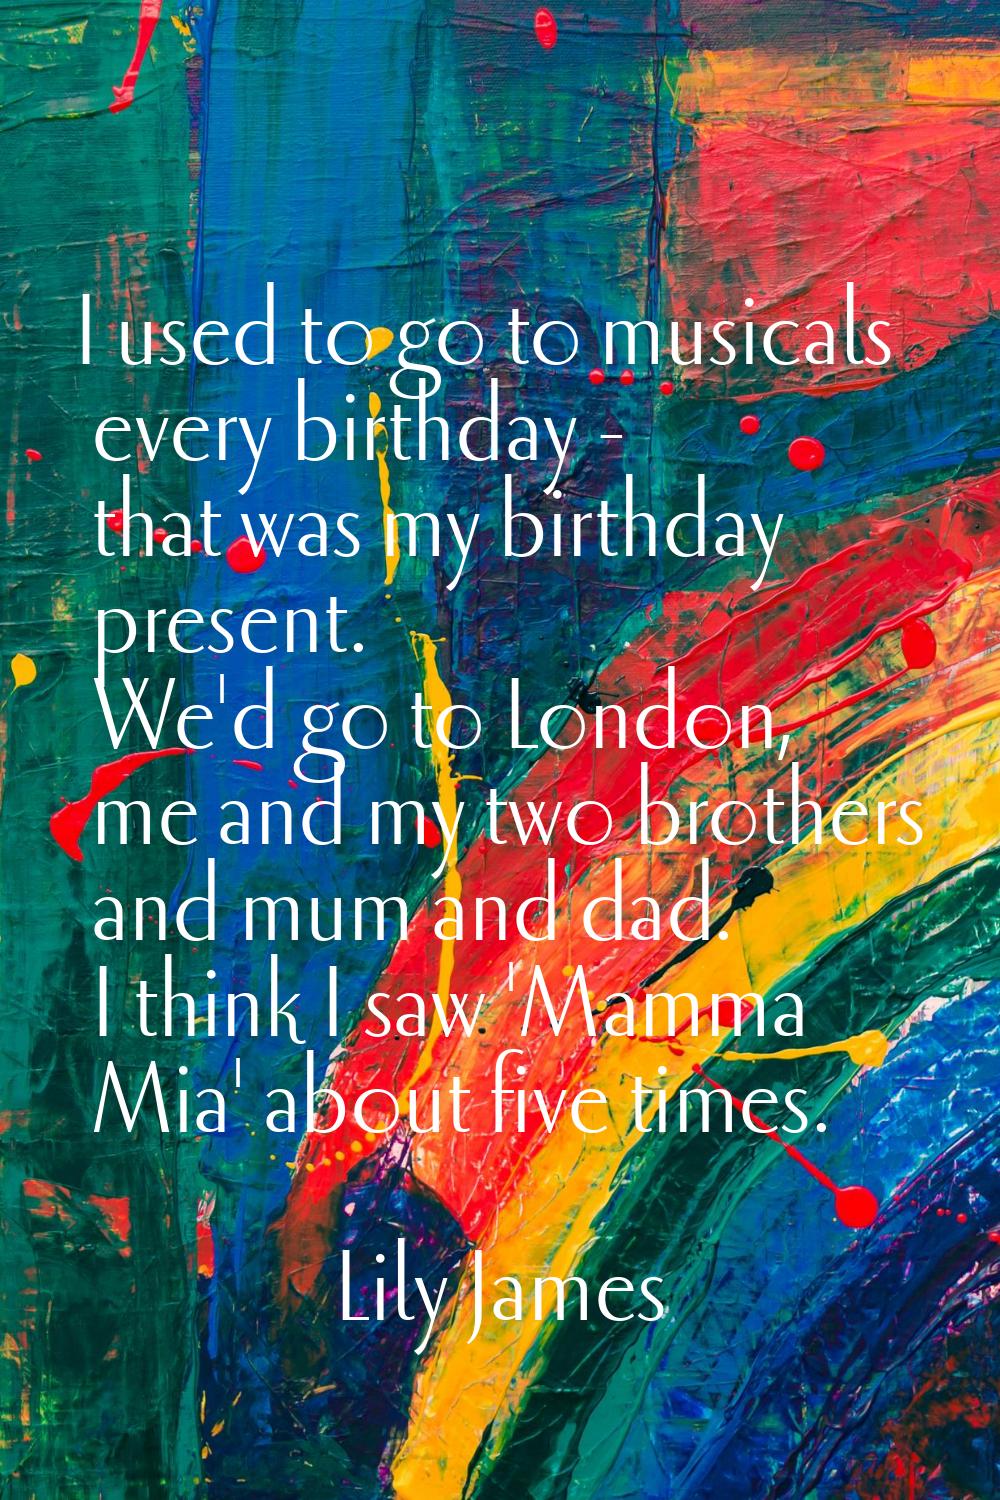 I used to go to musicals every birthday - that was my birthday present. We'd go to London, me and m